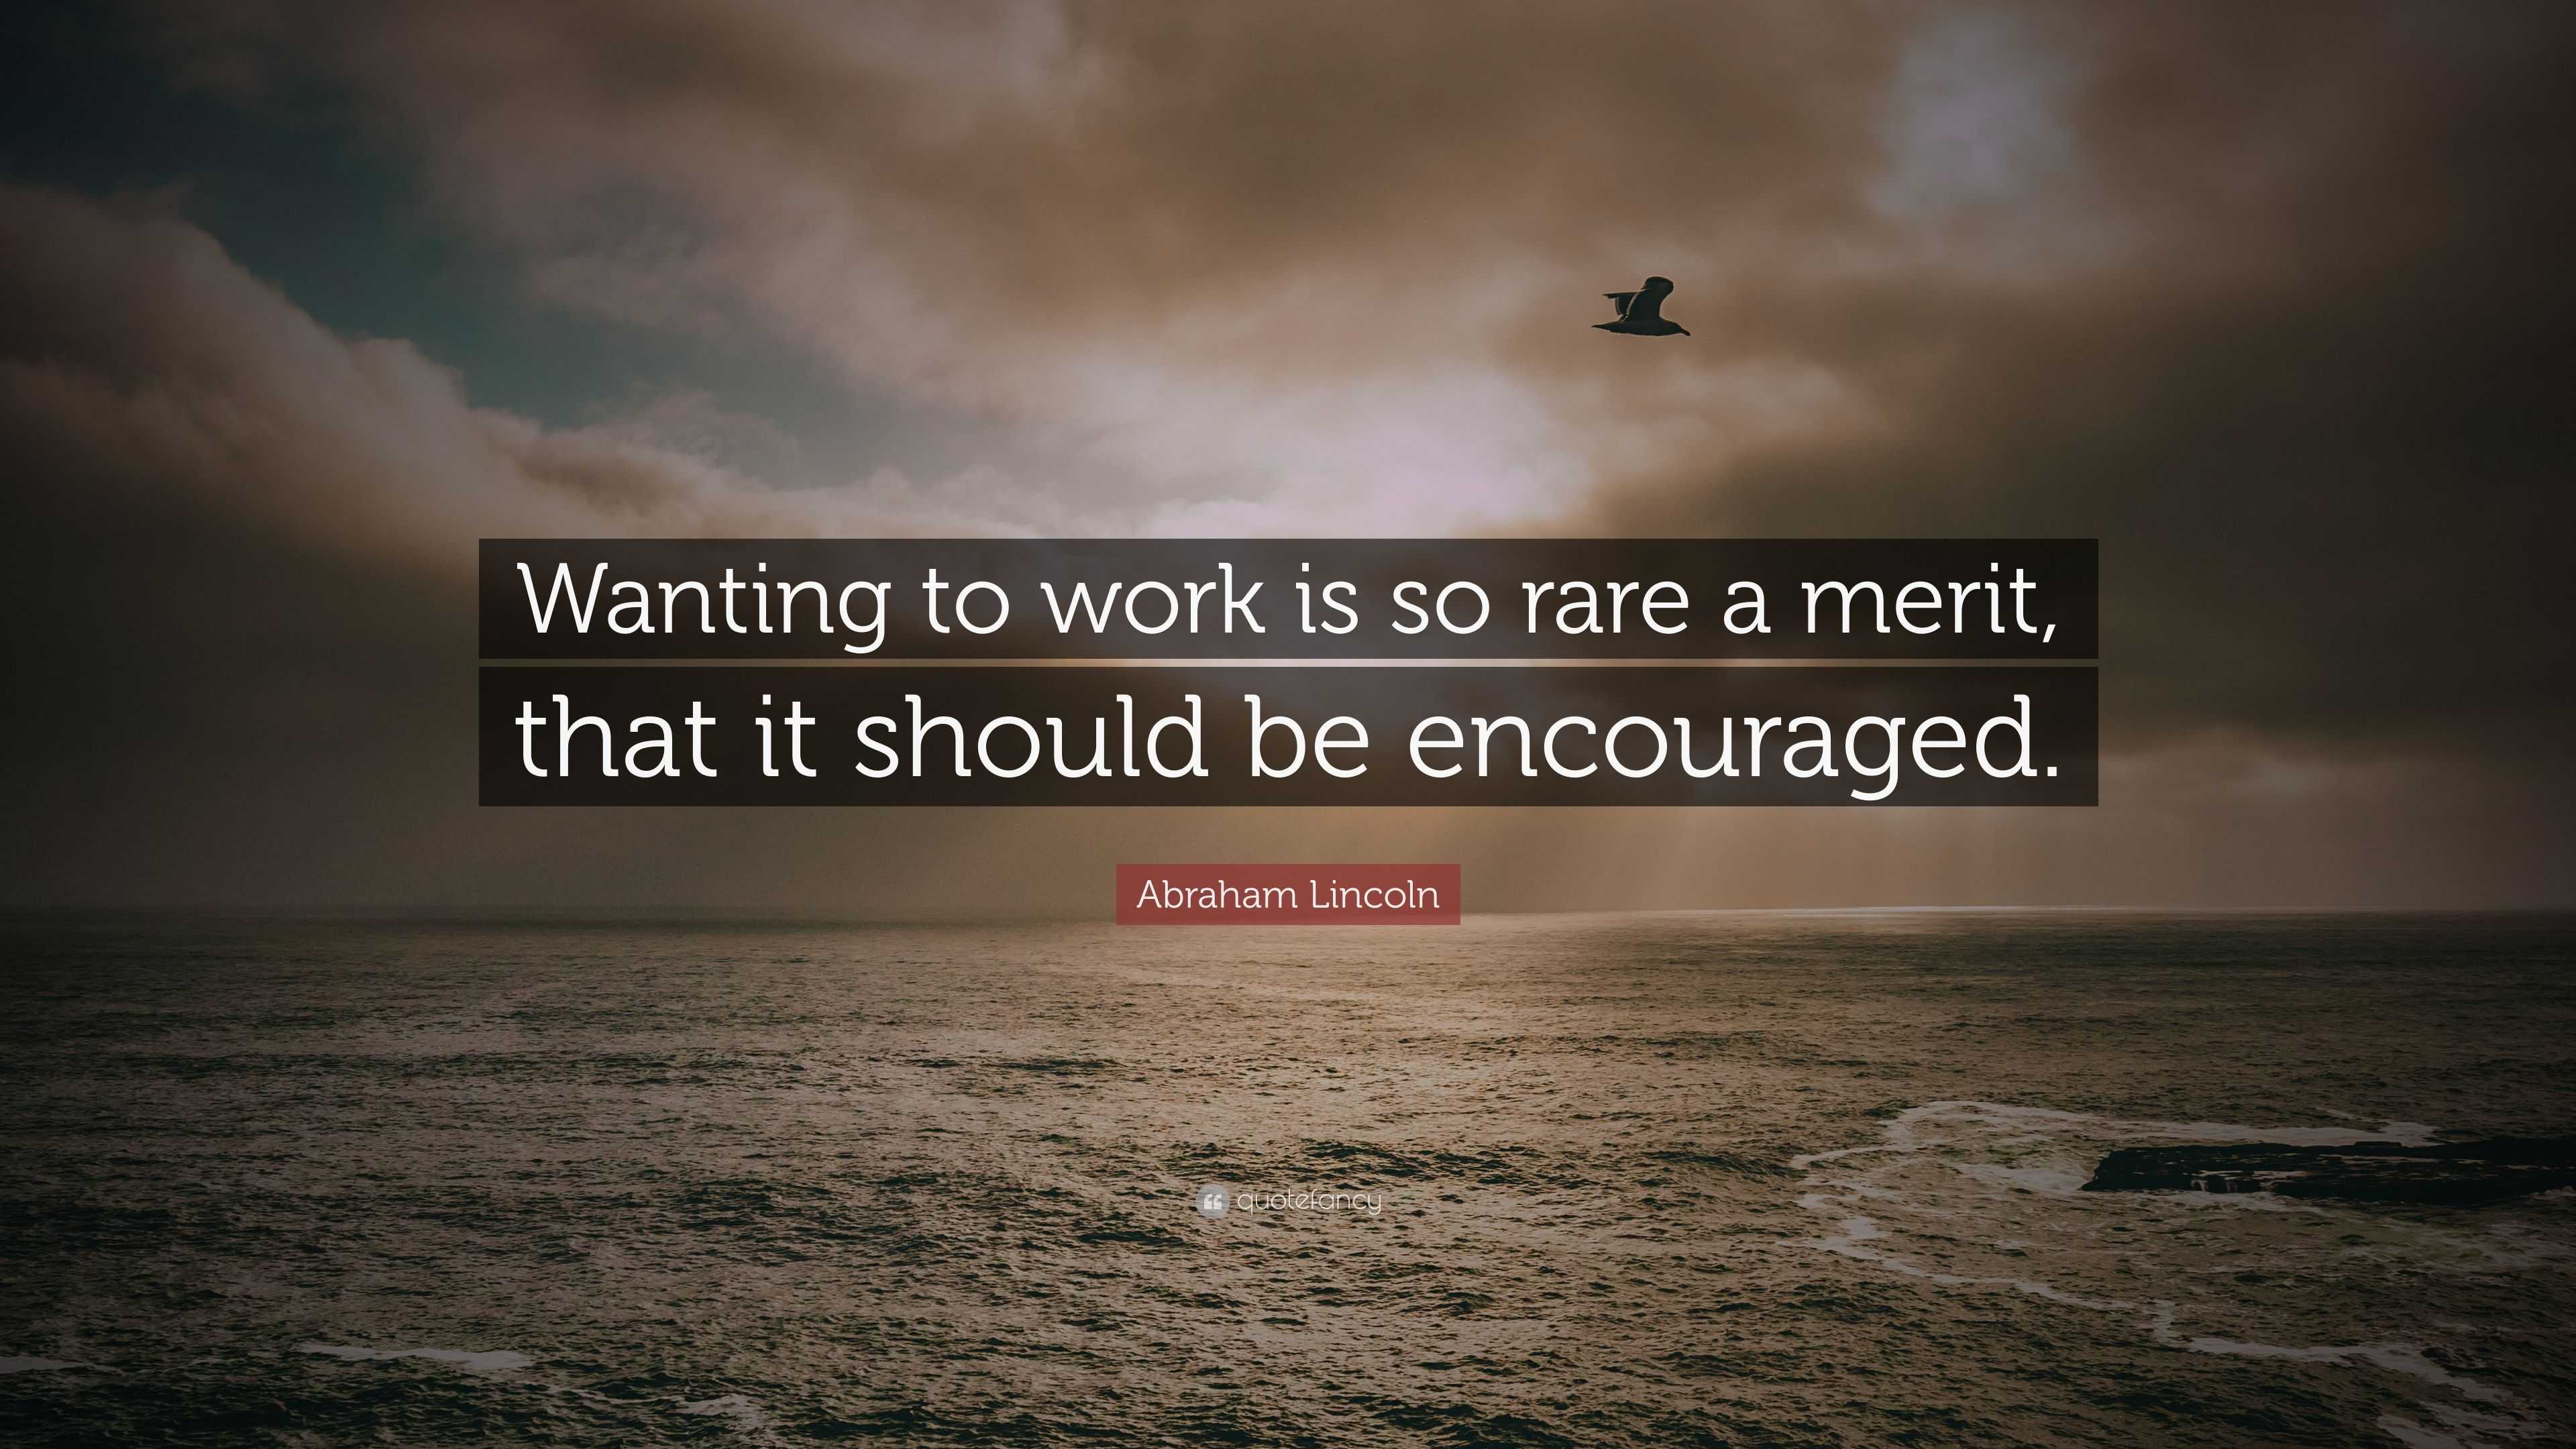 Abraham Lincoln Quote: “Wanting to work is so rare a merit, that it ...